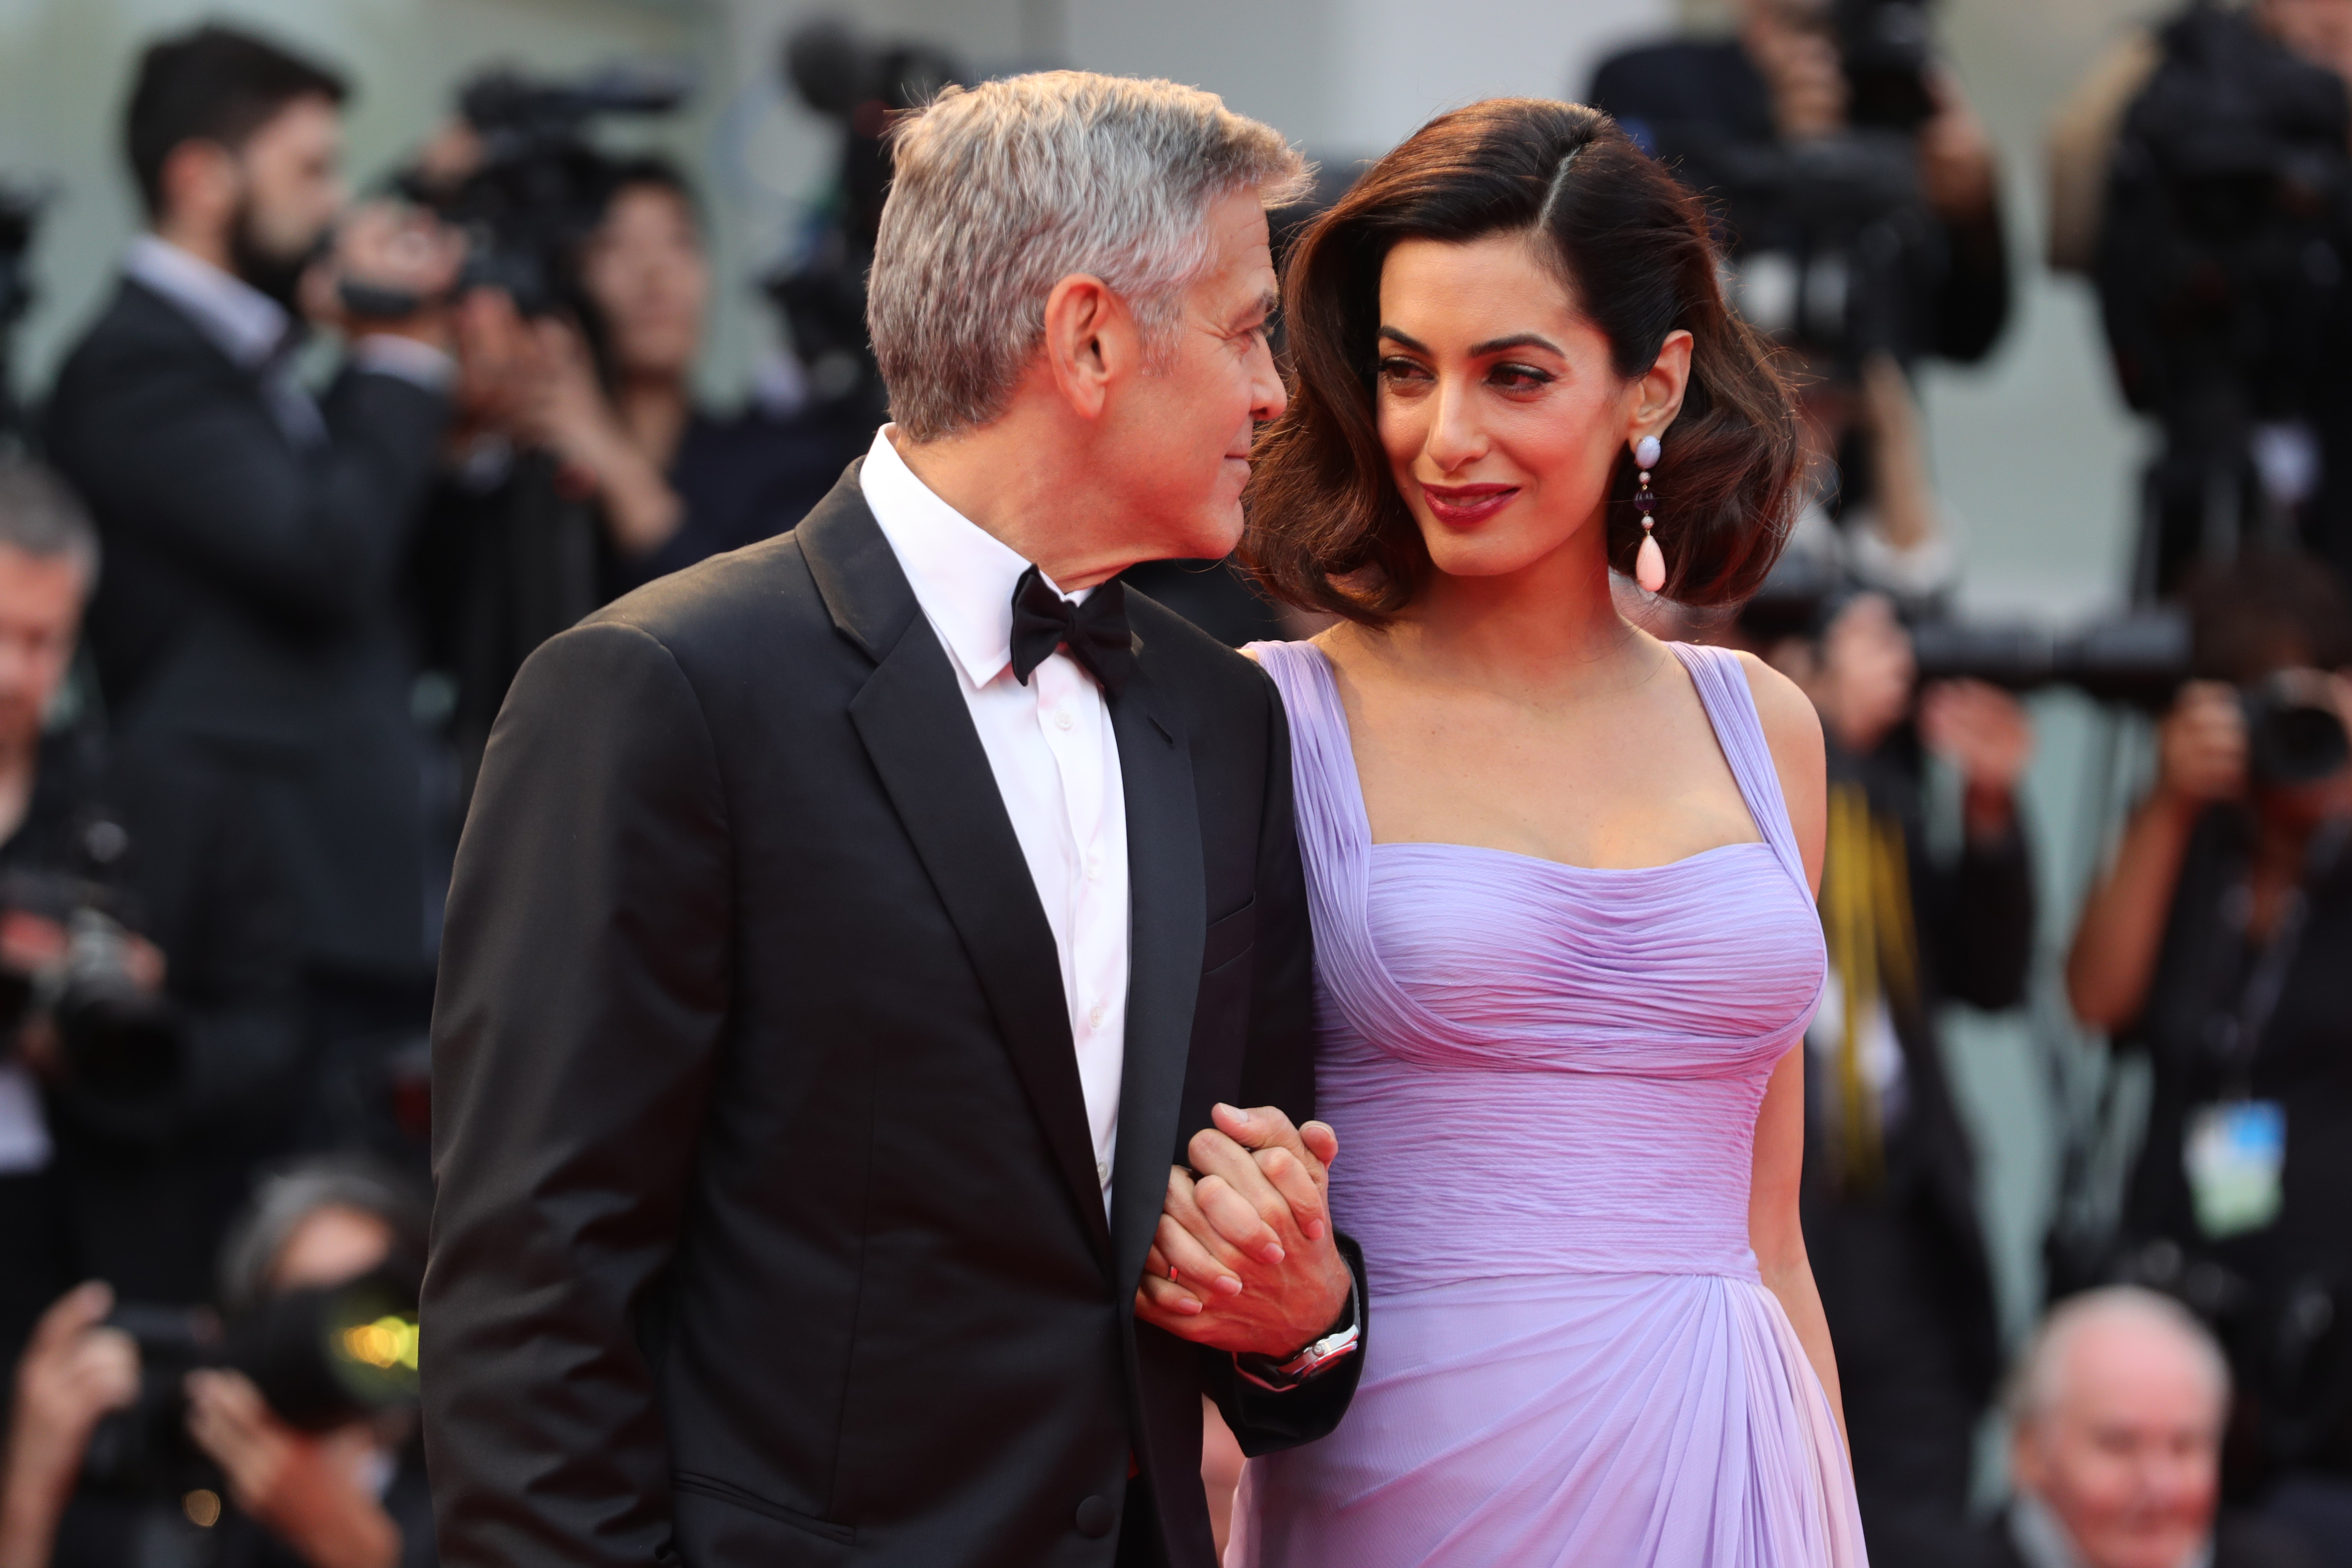 George and Amal Clooney at the 74th Venice Film Festival in Venice, Italy on September 2, 2017 | Source: Getty Images